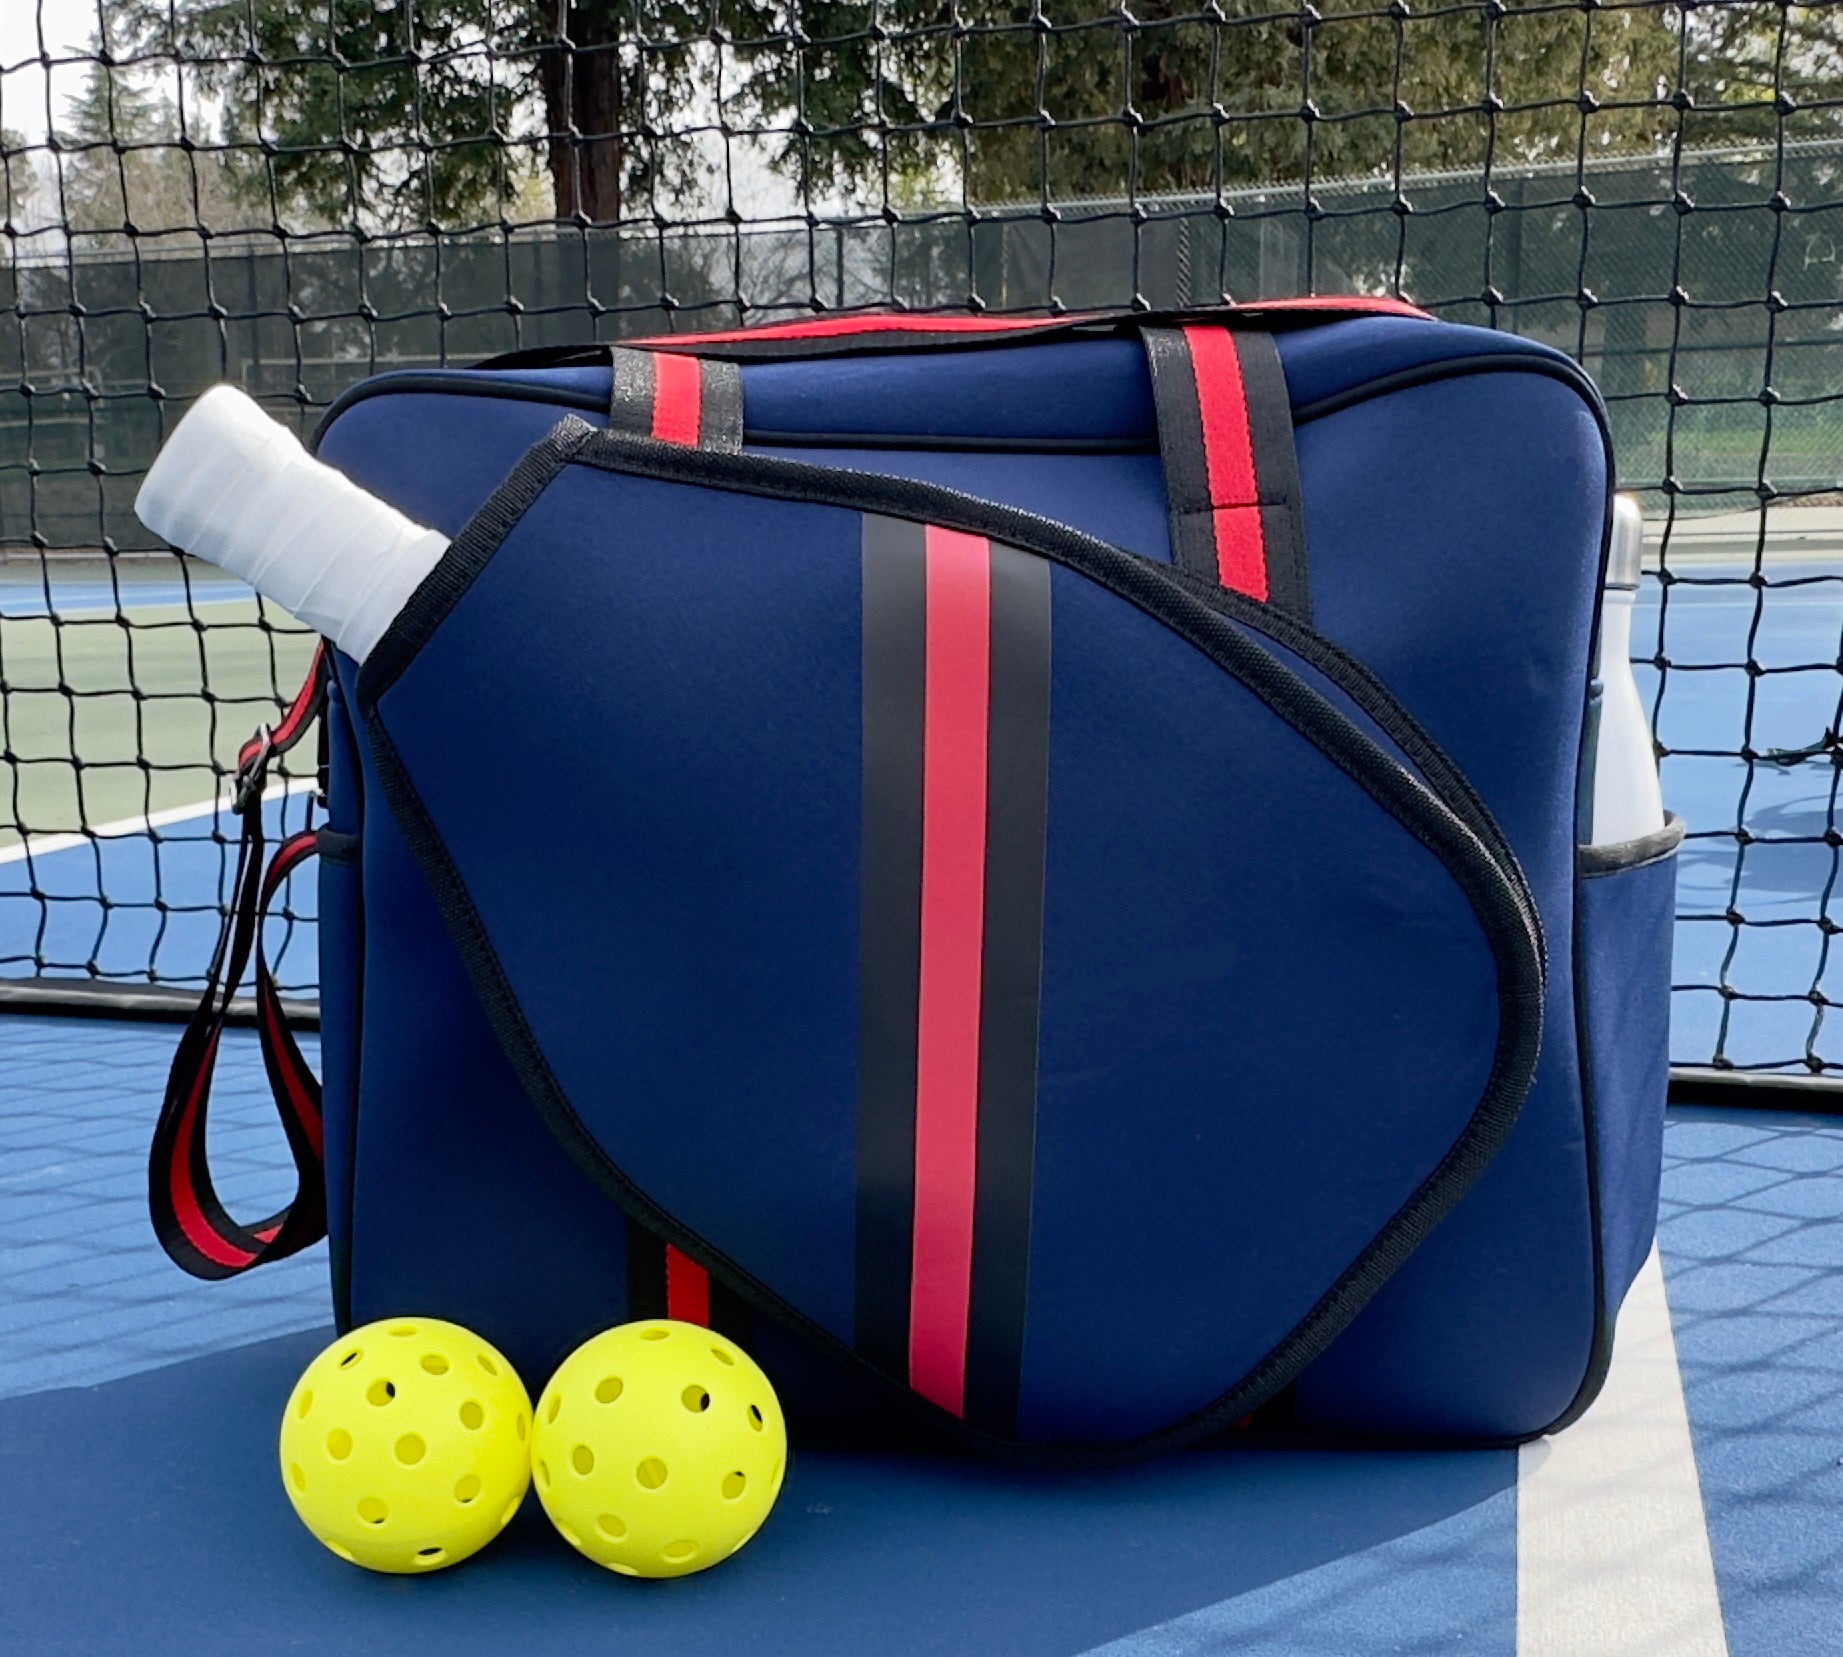 Navy and Red Pickleball Bag with fence hook